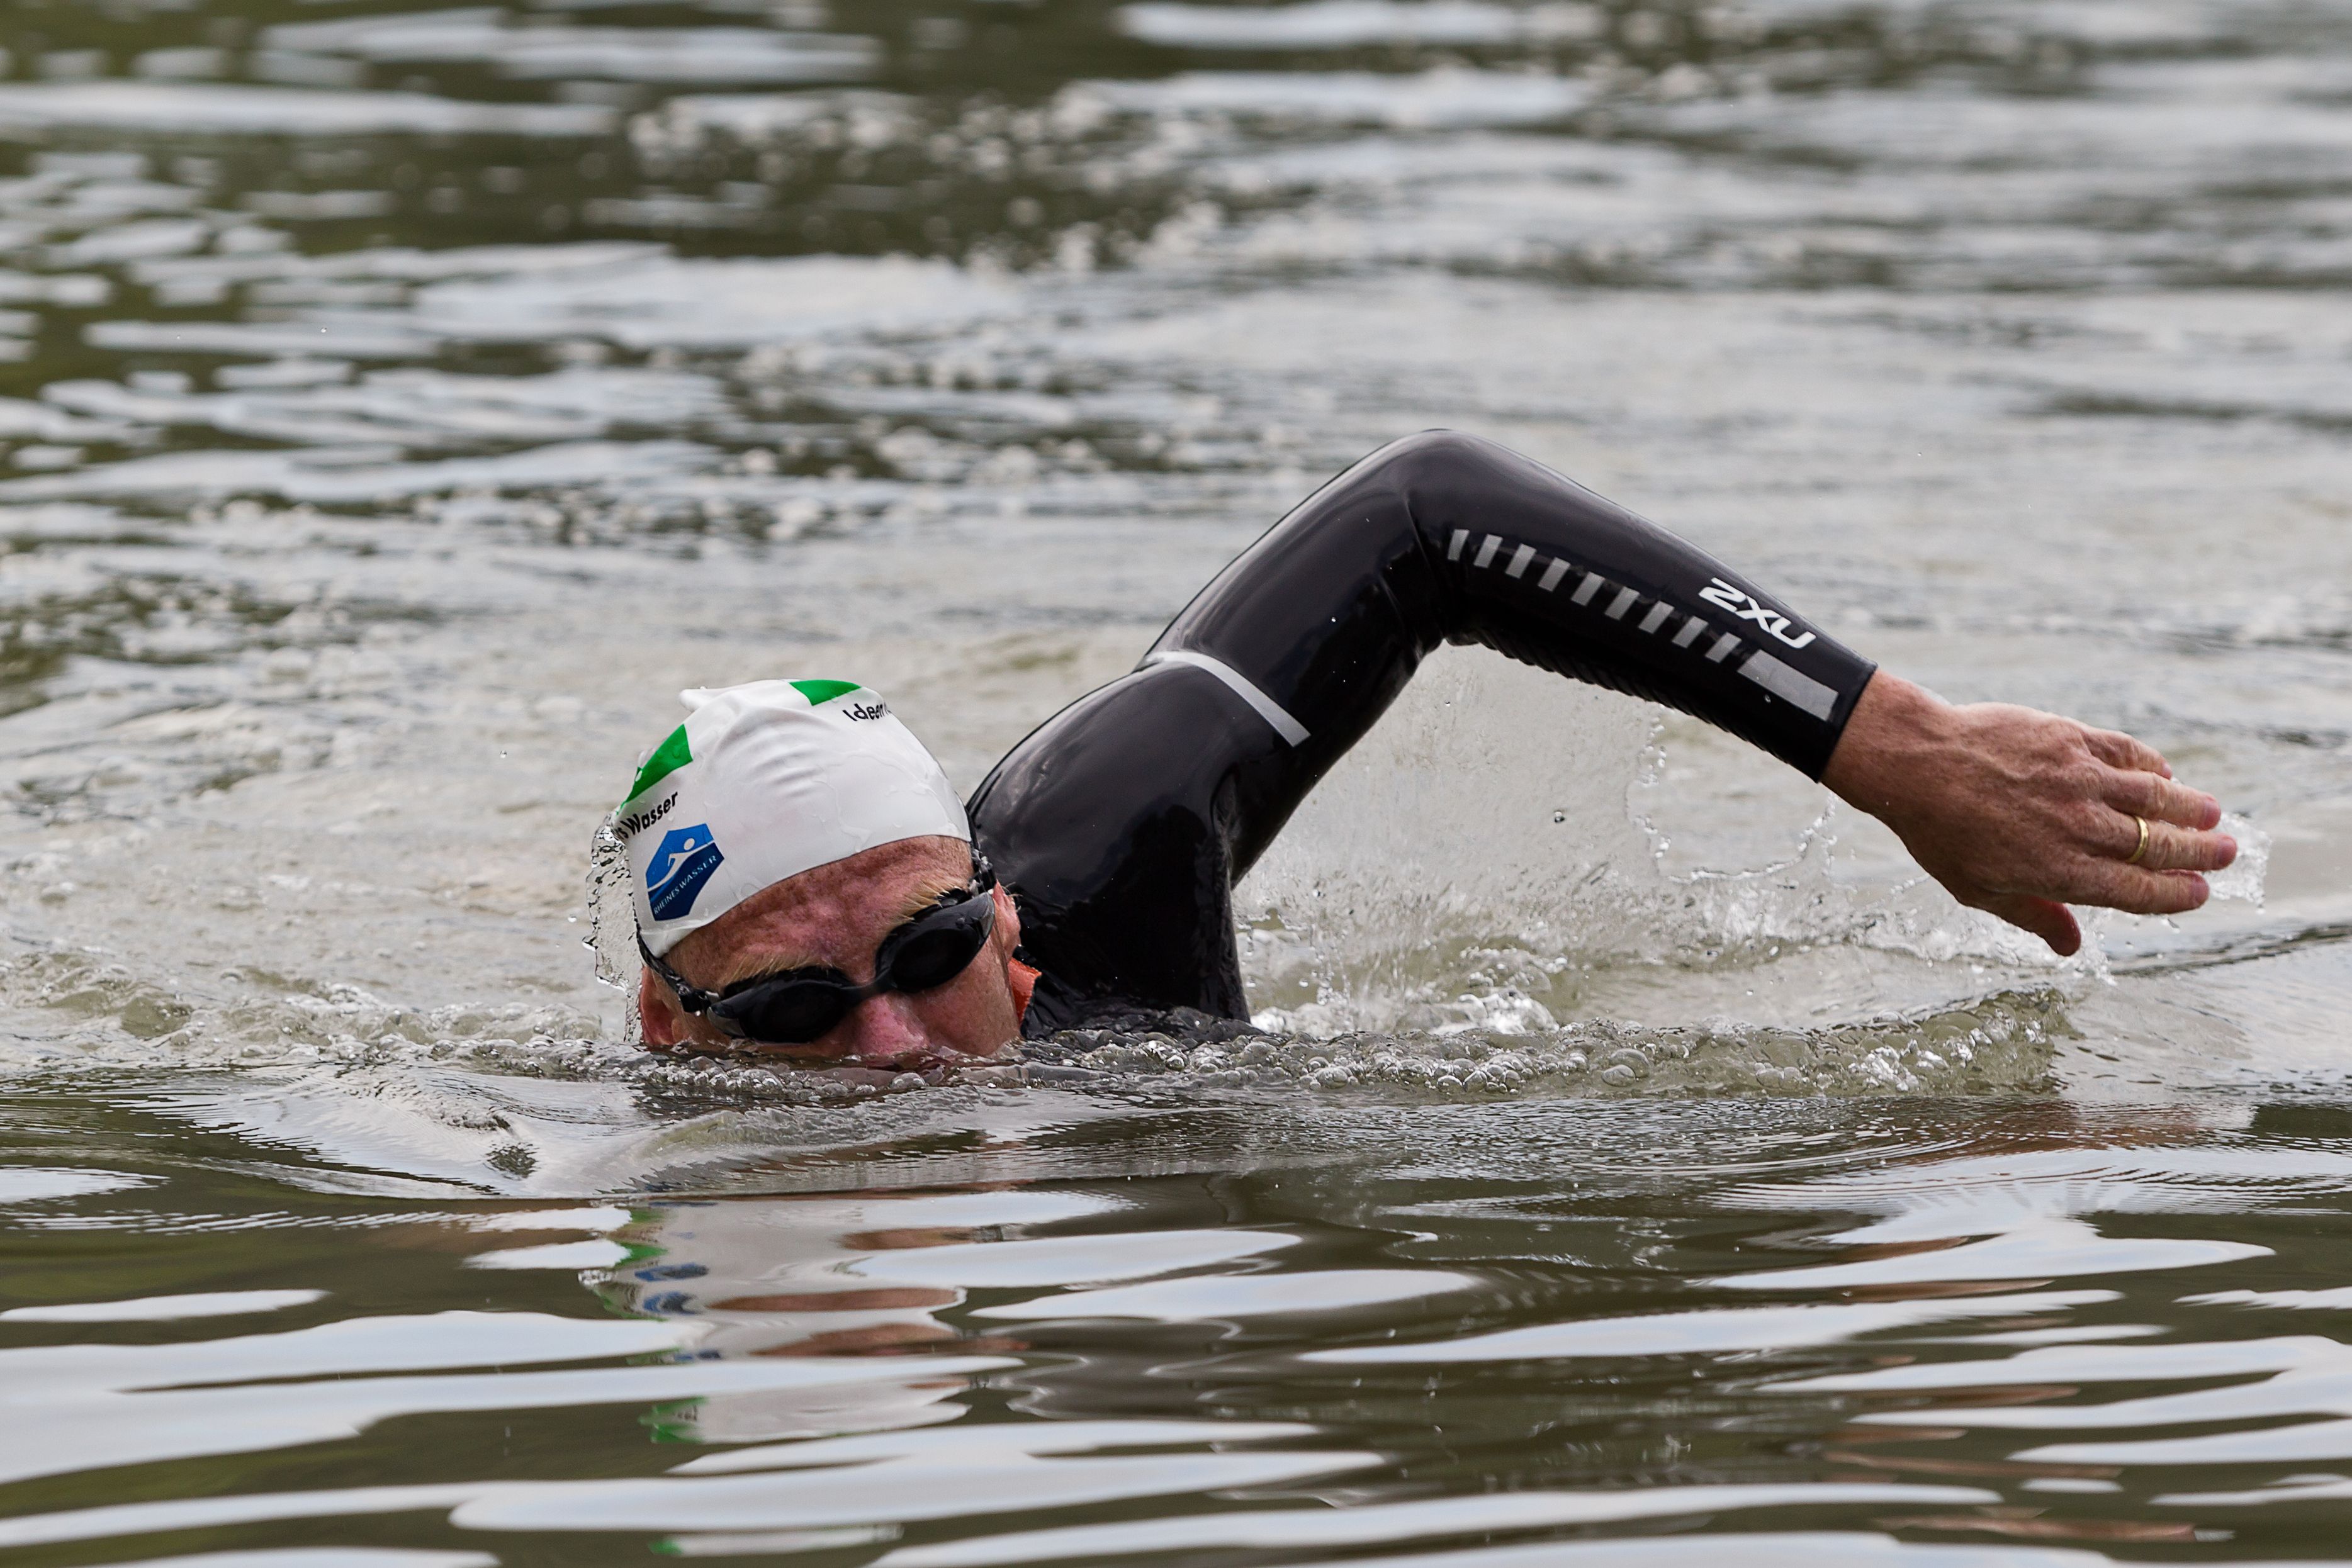 Dr. Andreas Fath during his world-record breaking swim of the Rhine River